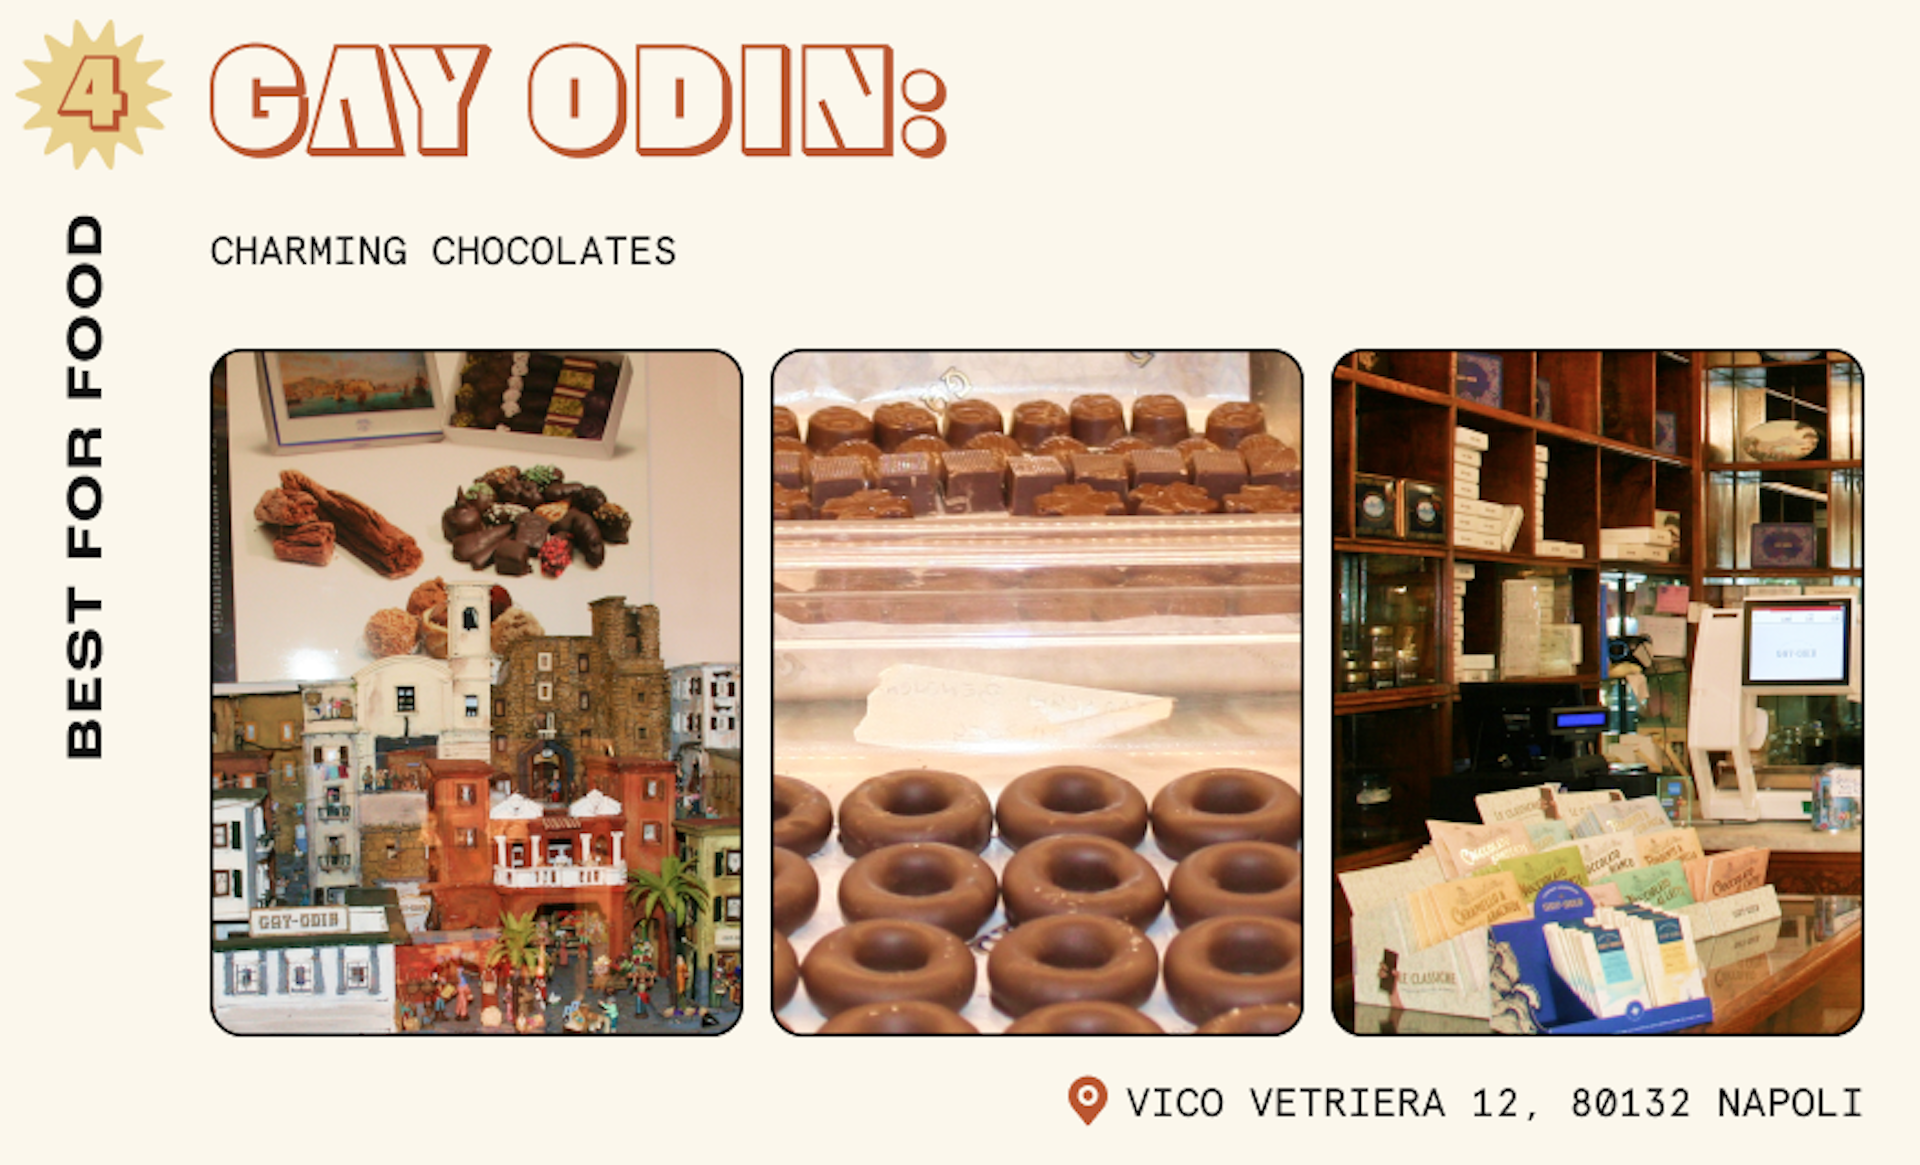 Chocolate on display in Gay Odin, Naples